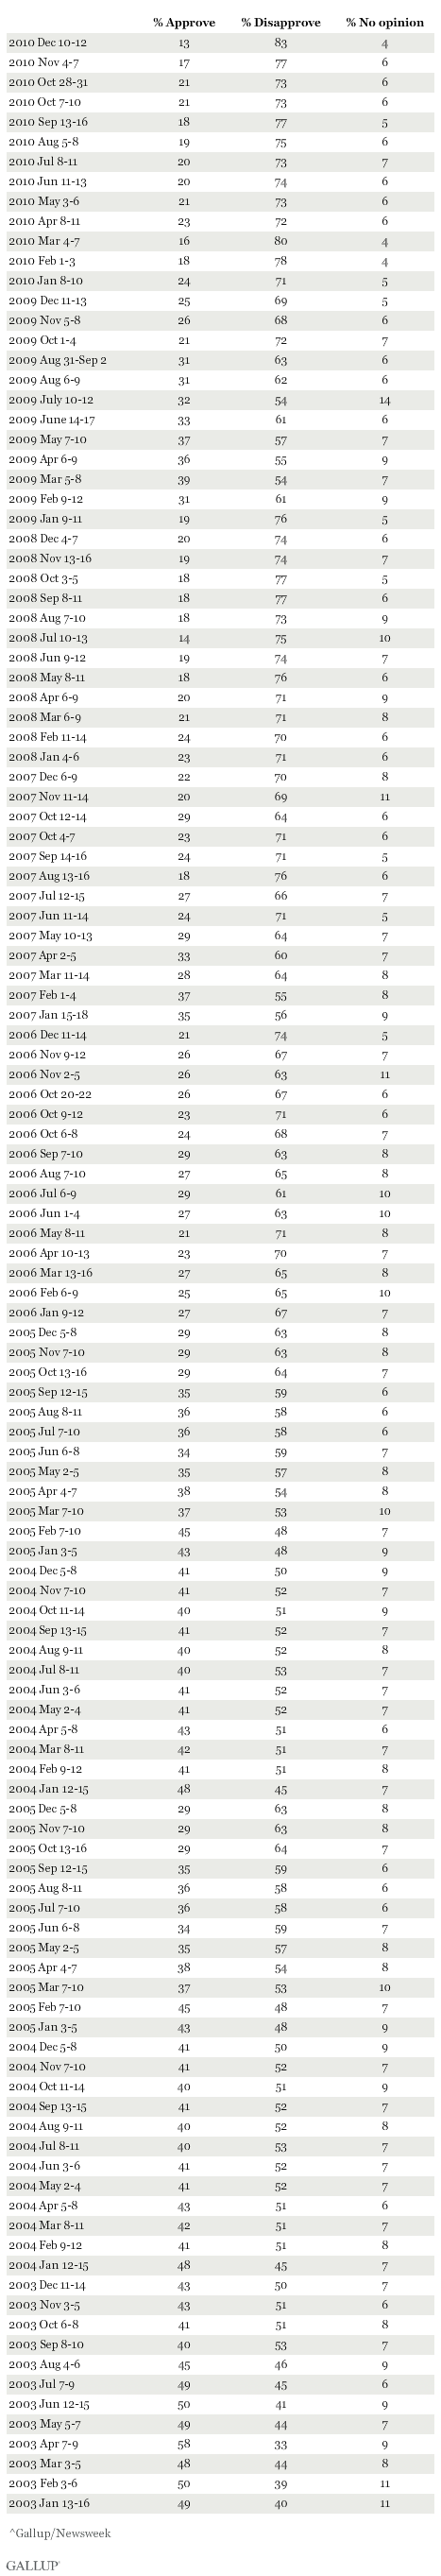 Trend: Do you approve or disapprove of the way Congress is handling its job? 2003-2010